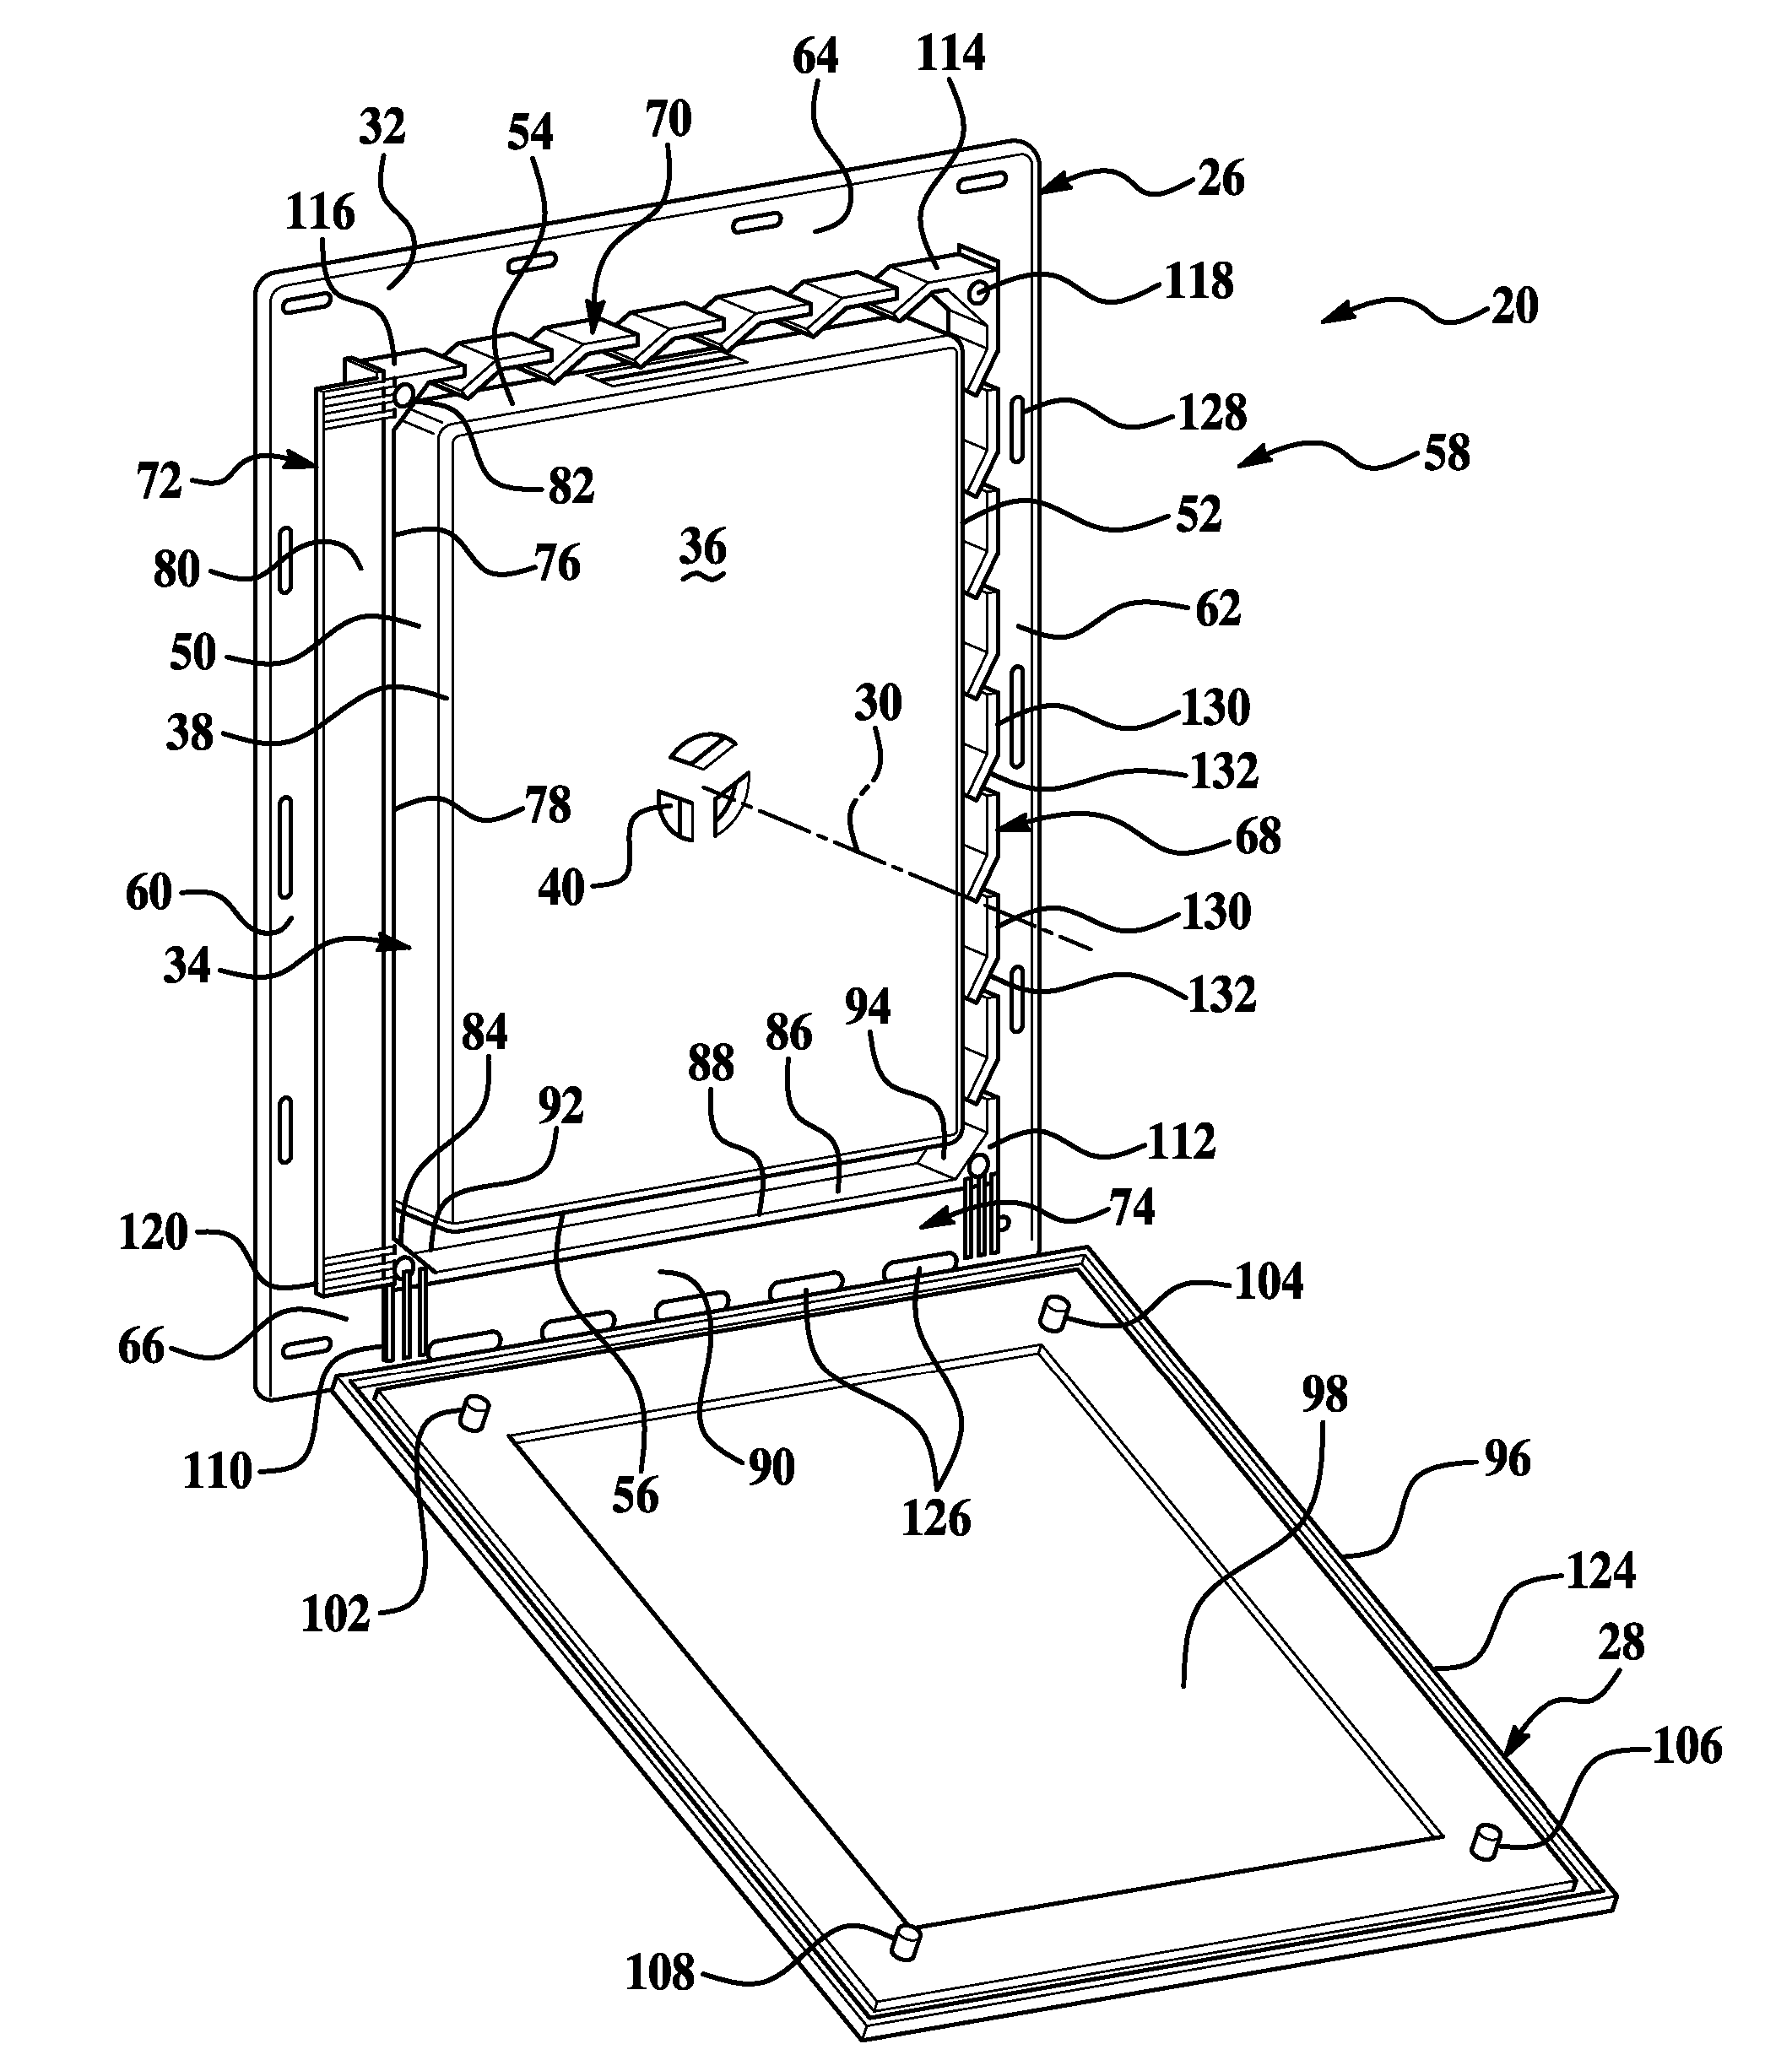 Bi-directional mounting bracket assembly for exterior siding